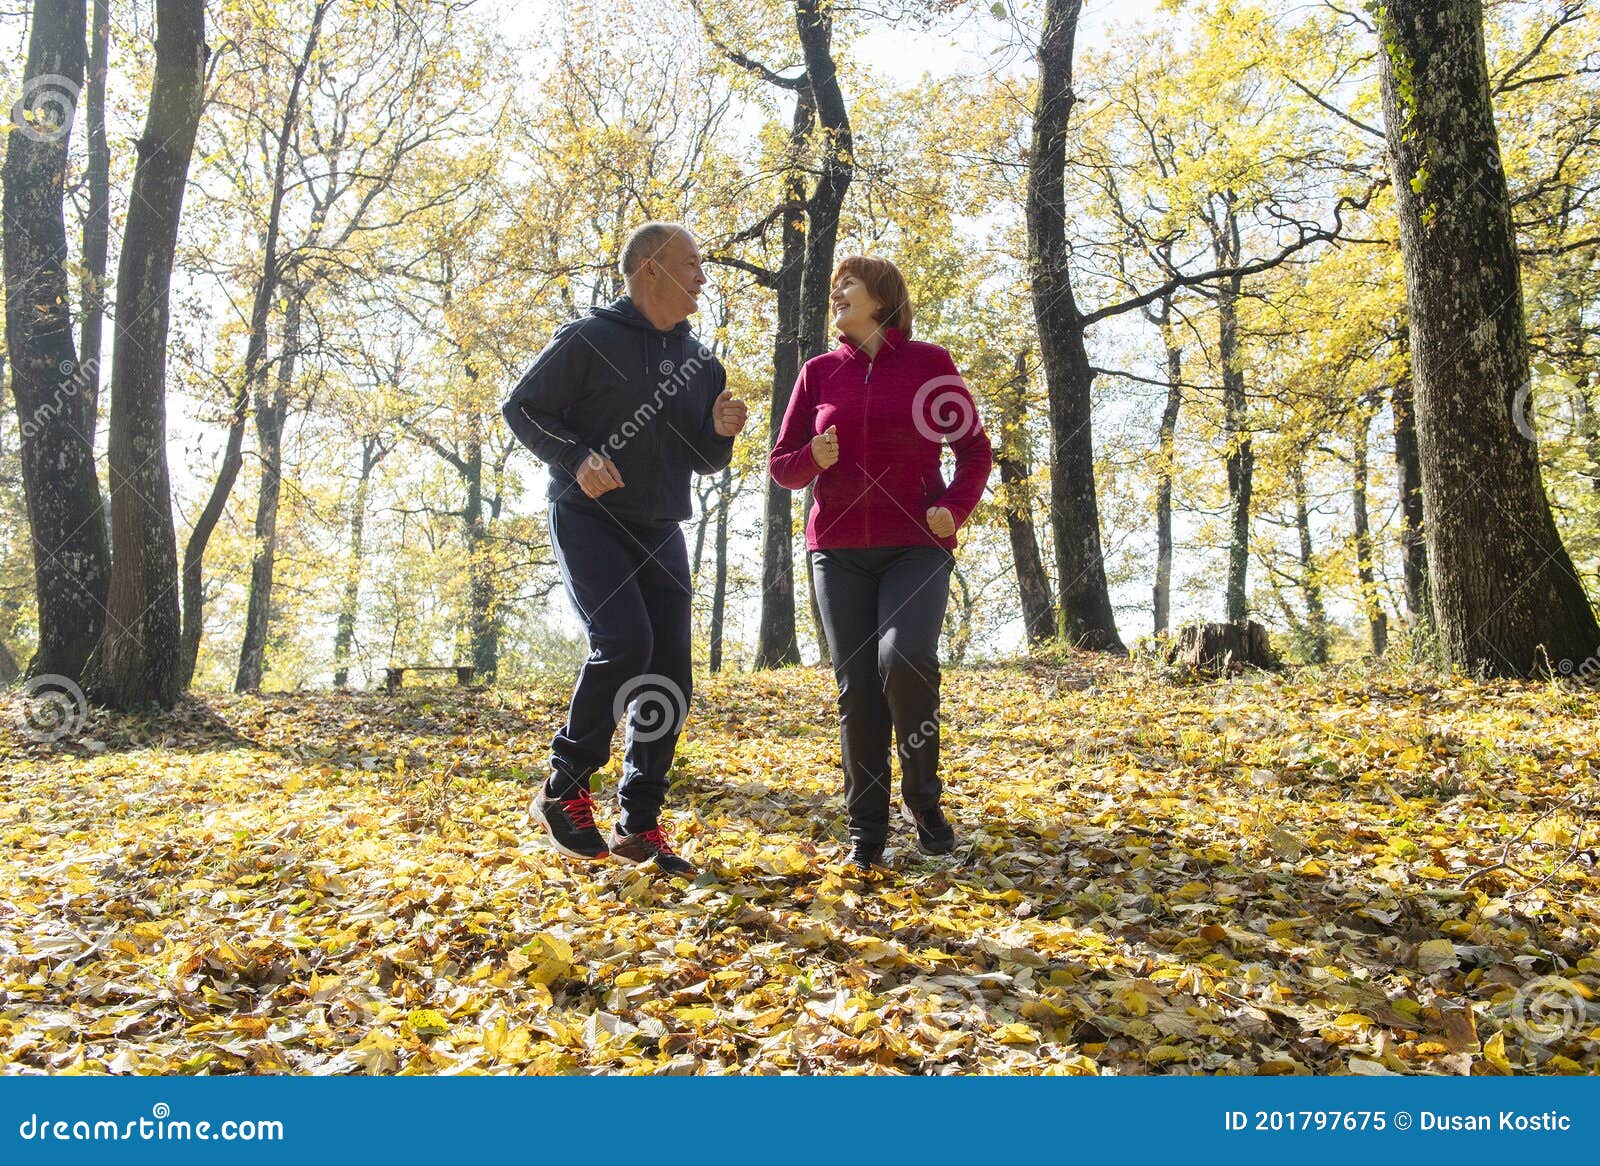 Seniors Jogging on a Forest Stock Image - Image of nature, seniors ...